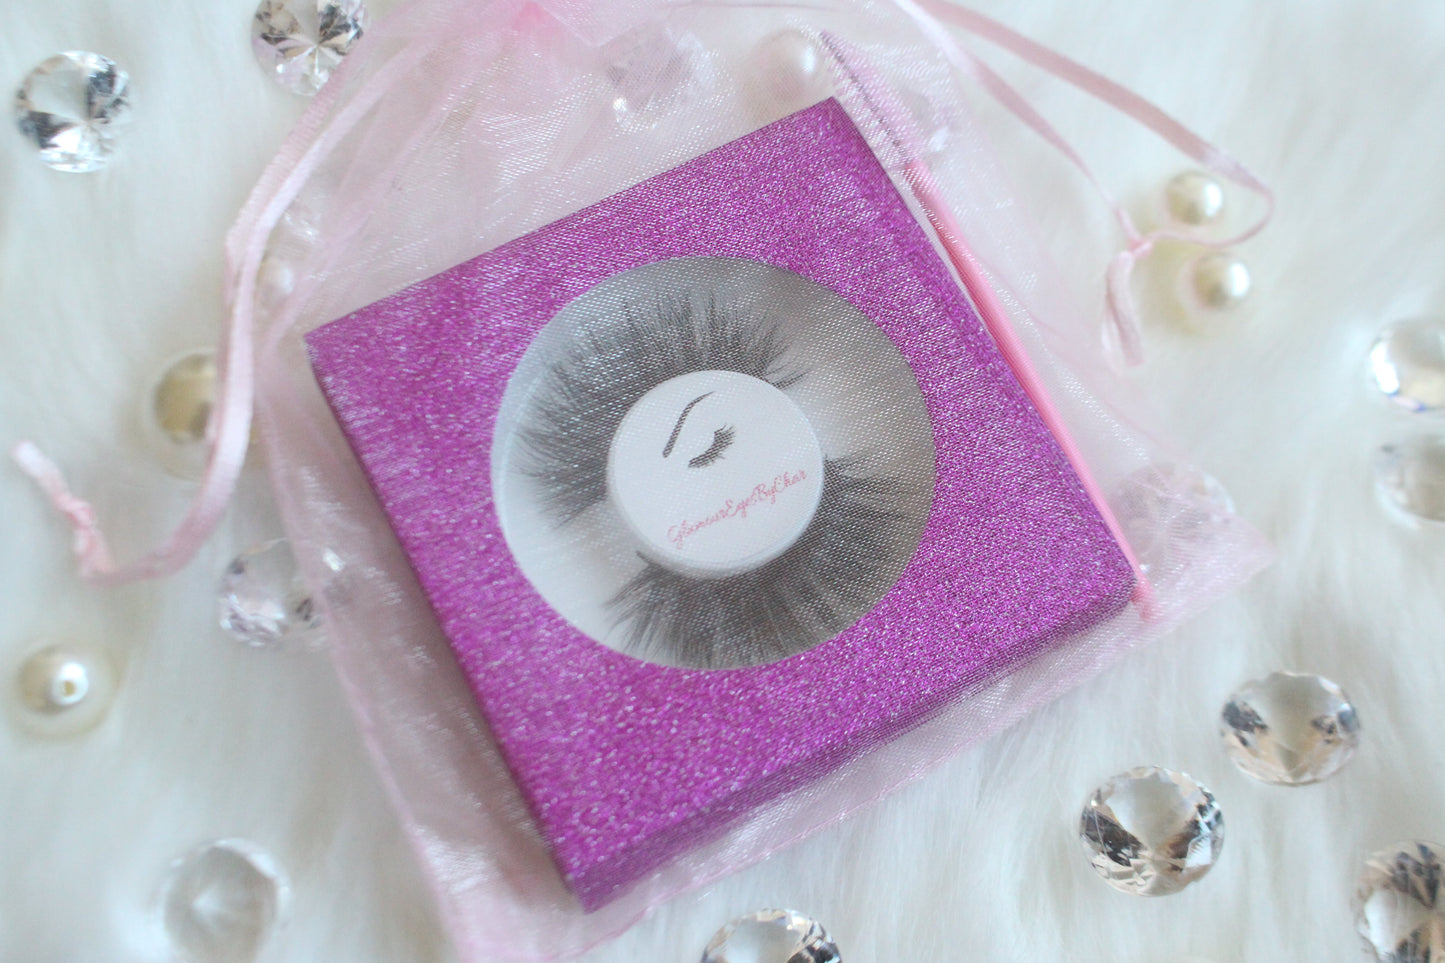 These 3D luxurious mink lashes are called Lala and are 15-18mm in length. They are light and fluffy, and very comfortable to wear on the lids. The thin lashband, makes the application process a breeze.